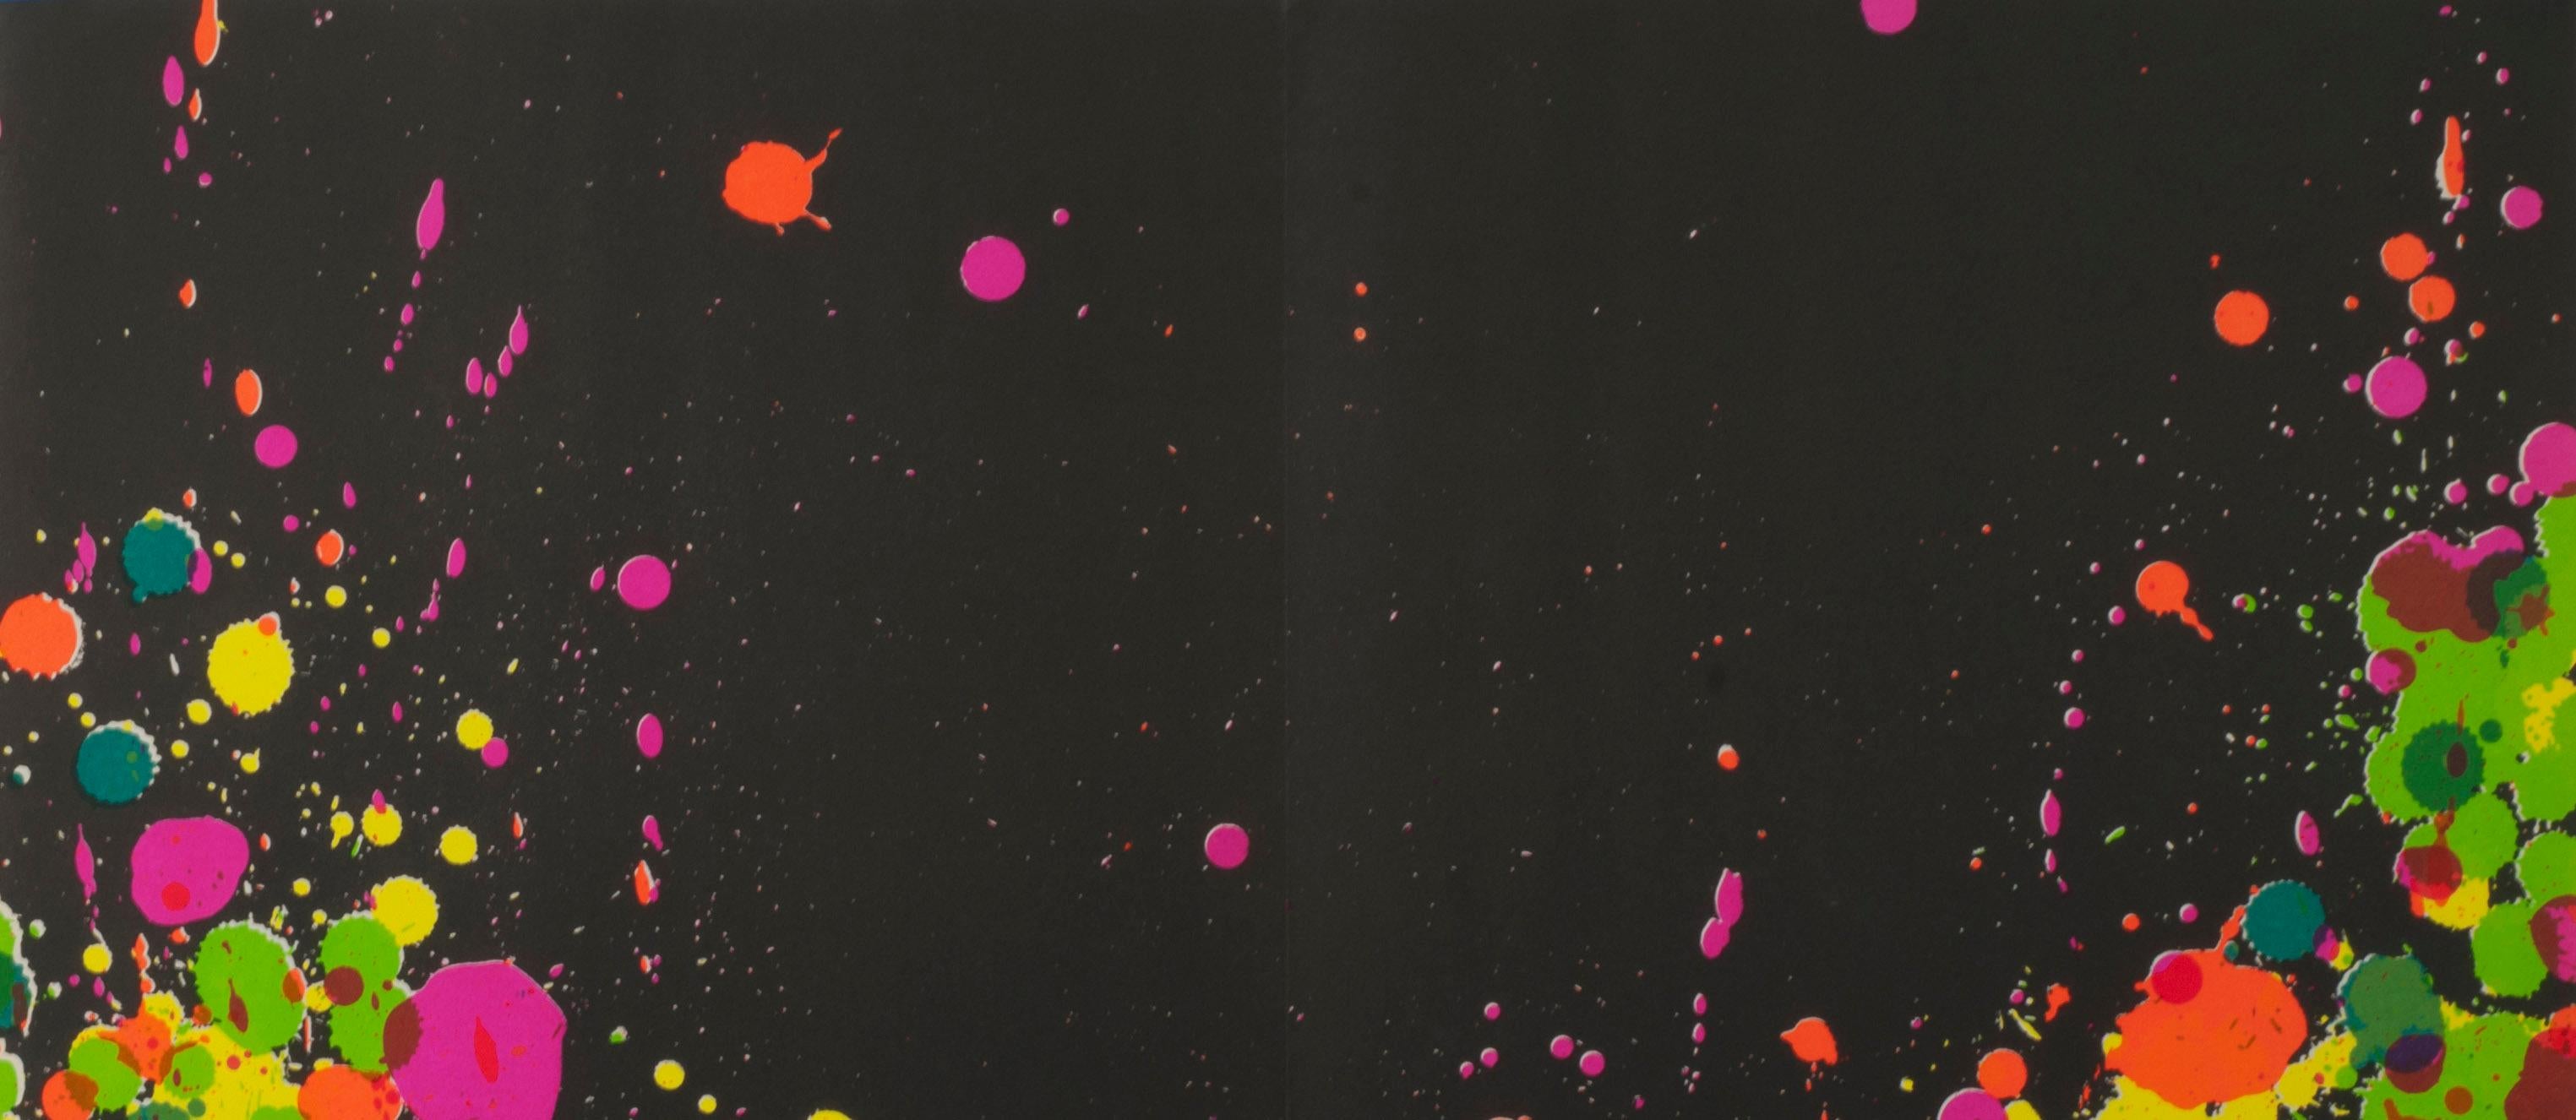 Untitled
Color lithograph, 1972
Unsigned
Edition: From: Fresh Air School, Exhibition of Paintings Large Edition (2000?)
Published by the Carnegie Institute Museum of Art, 1973
Printed by Adrien Maeght, Paris
Condition: Excellent colors
             